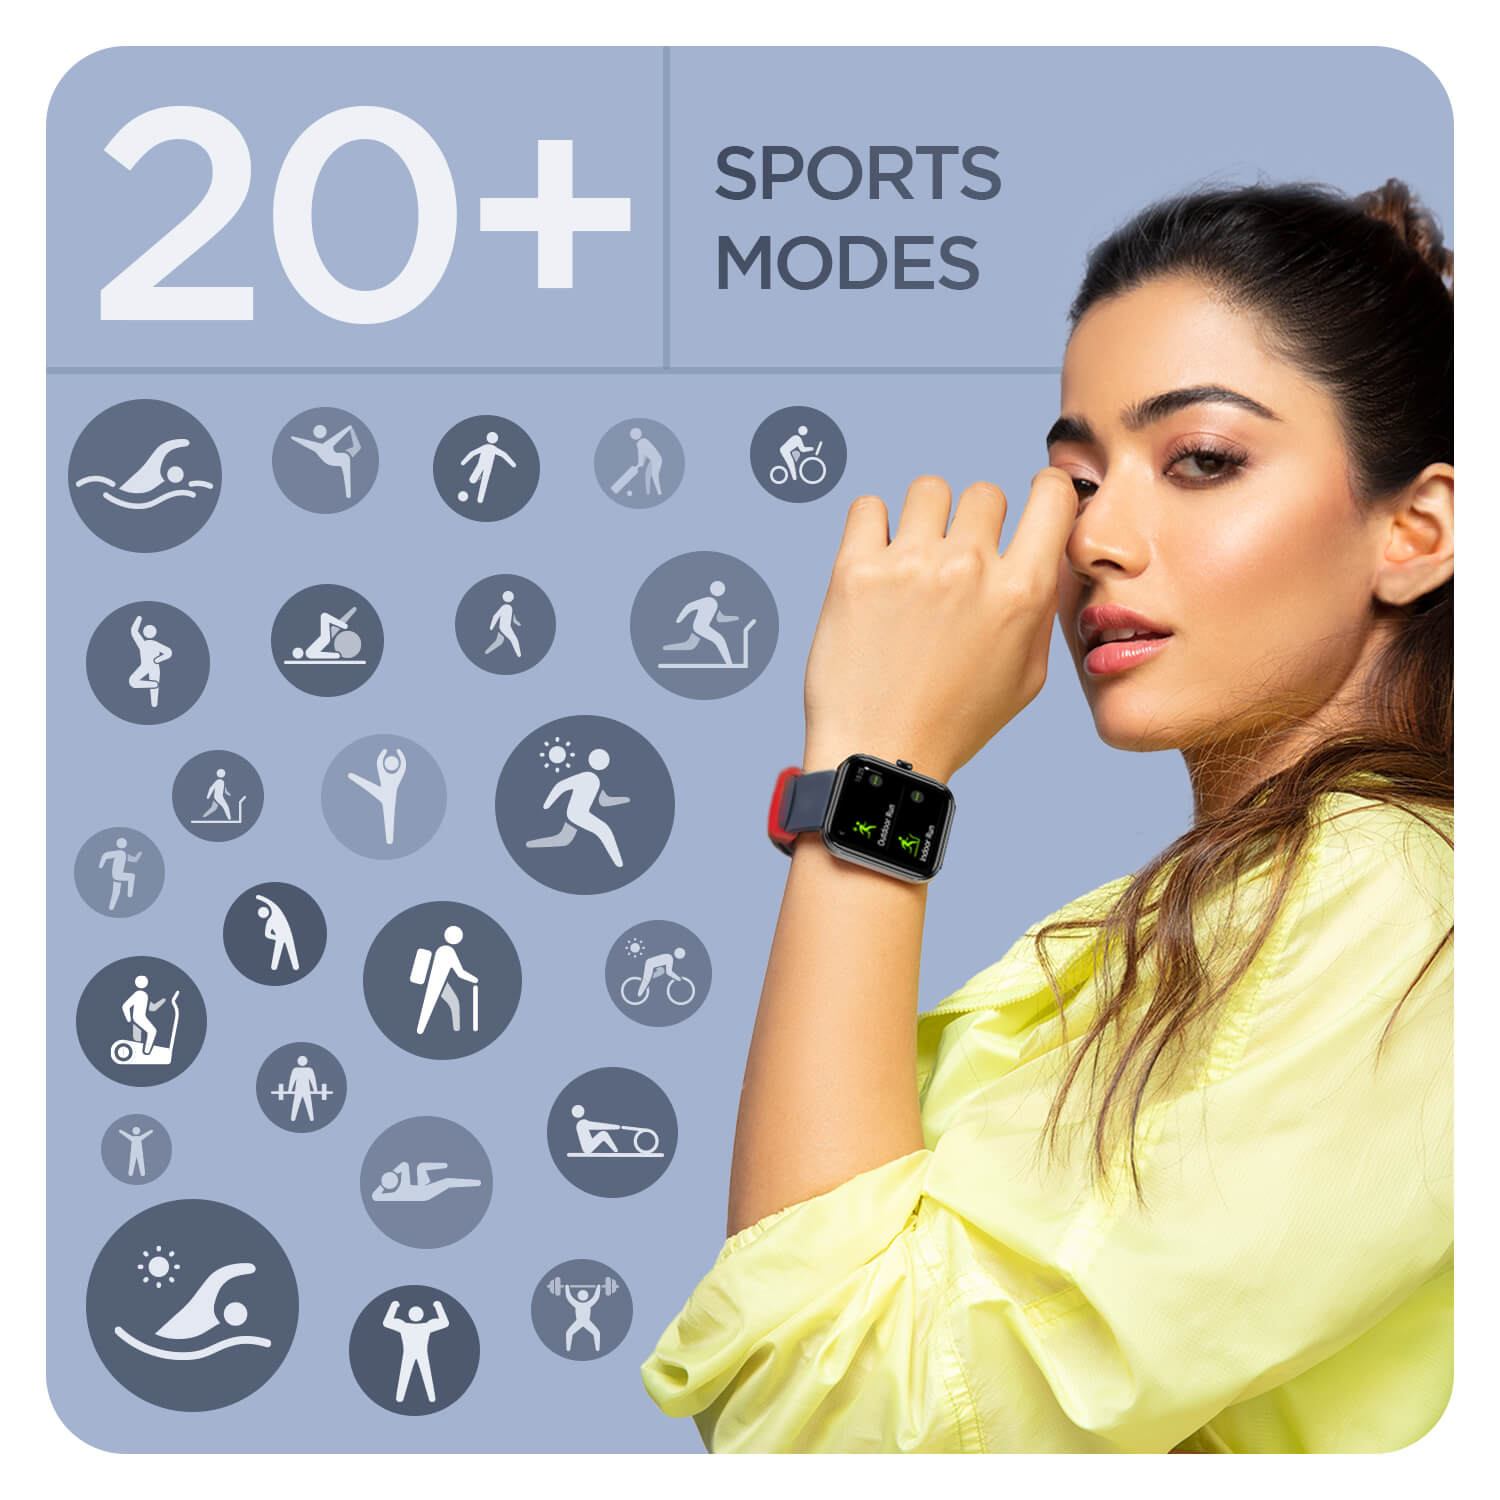 boAt Wave Select | Smartwatch with 1.69"(4.29 cm) Colour HD Display, 20+ Active Sport Modes, Heart Rate & SpO2 Monitor, 10 Day Battery Life